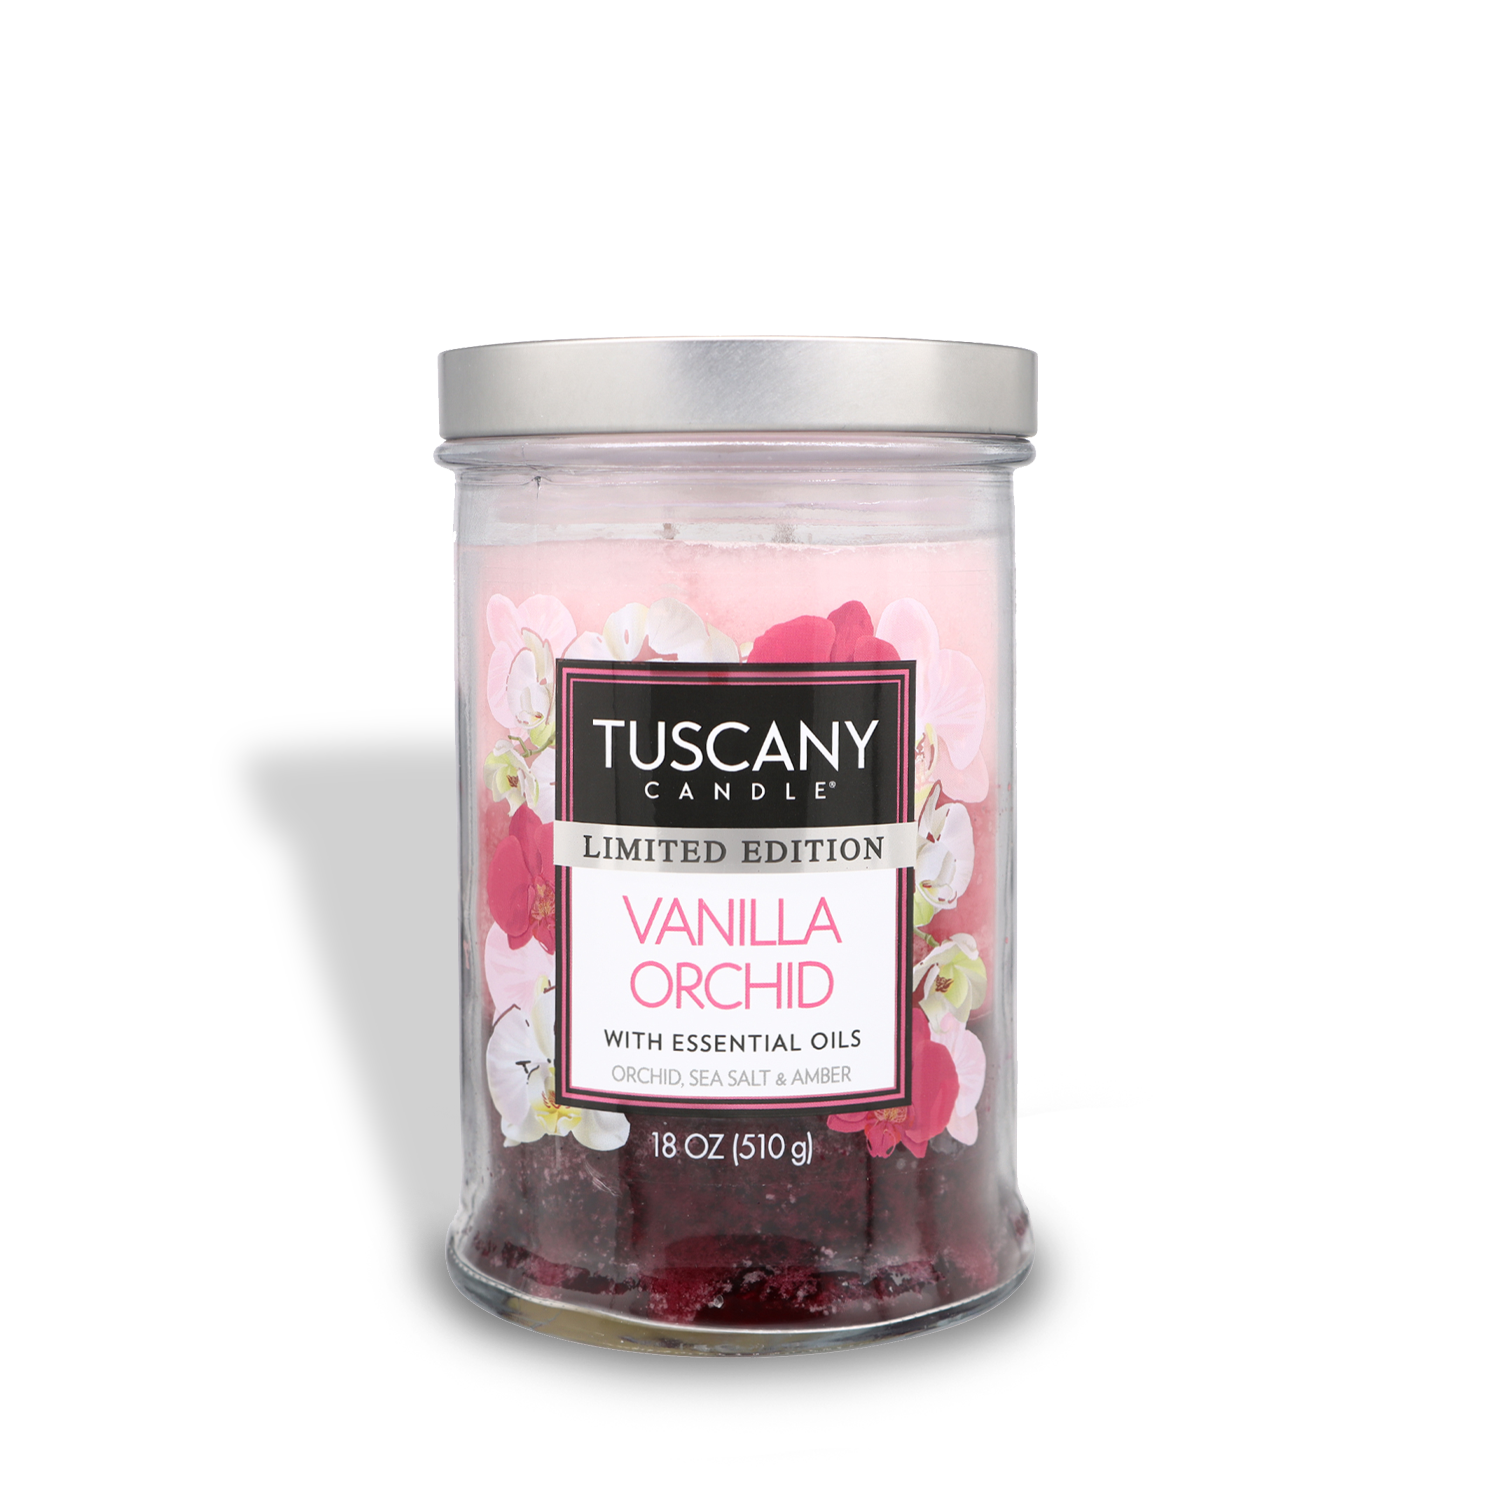 A Vanilla Orchid Long-Lasting Scented Jar Candle (18 oz) from the Tuscany Candle® SEASONAL Collection.